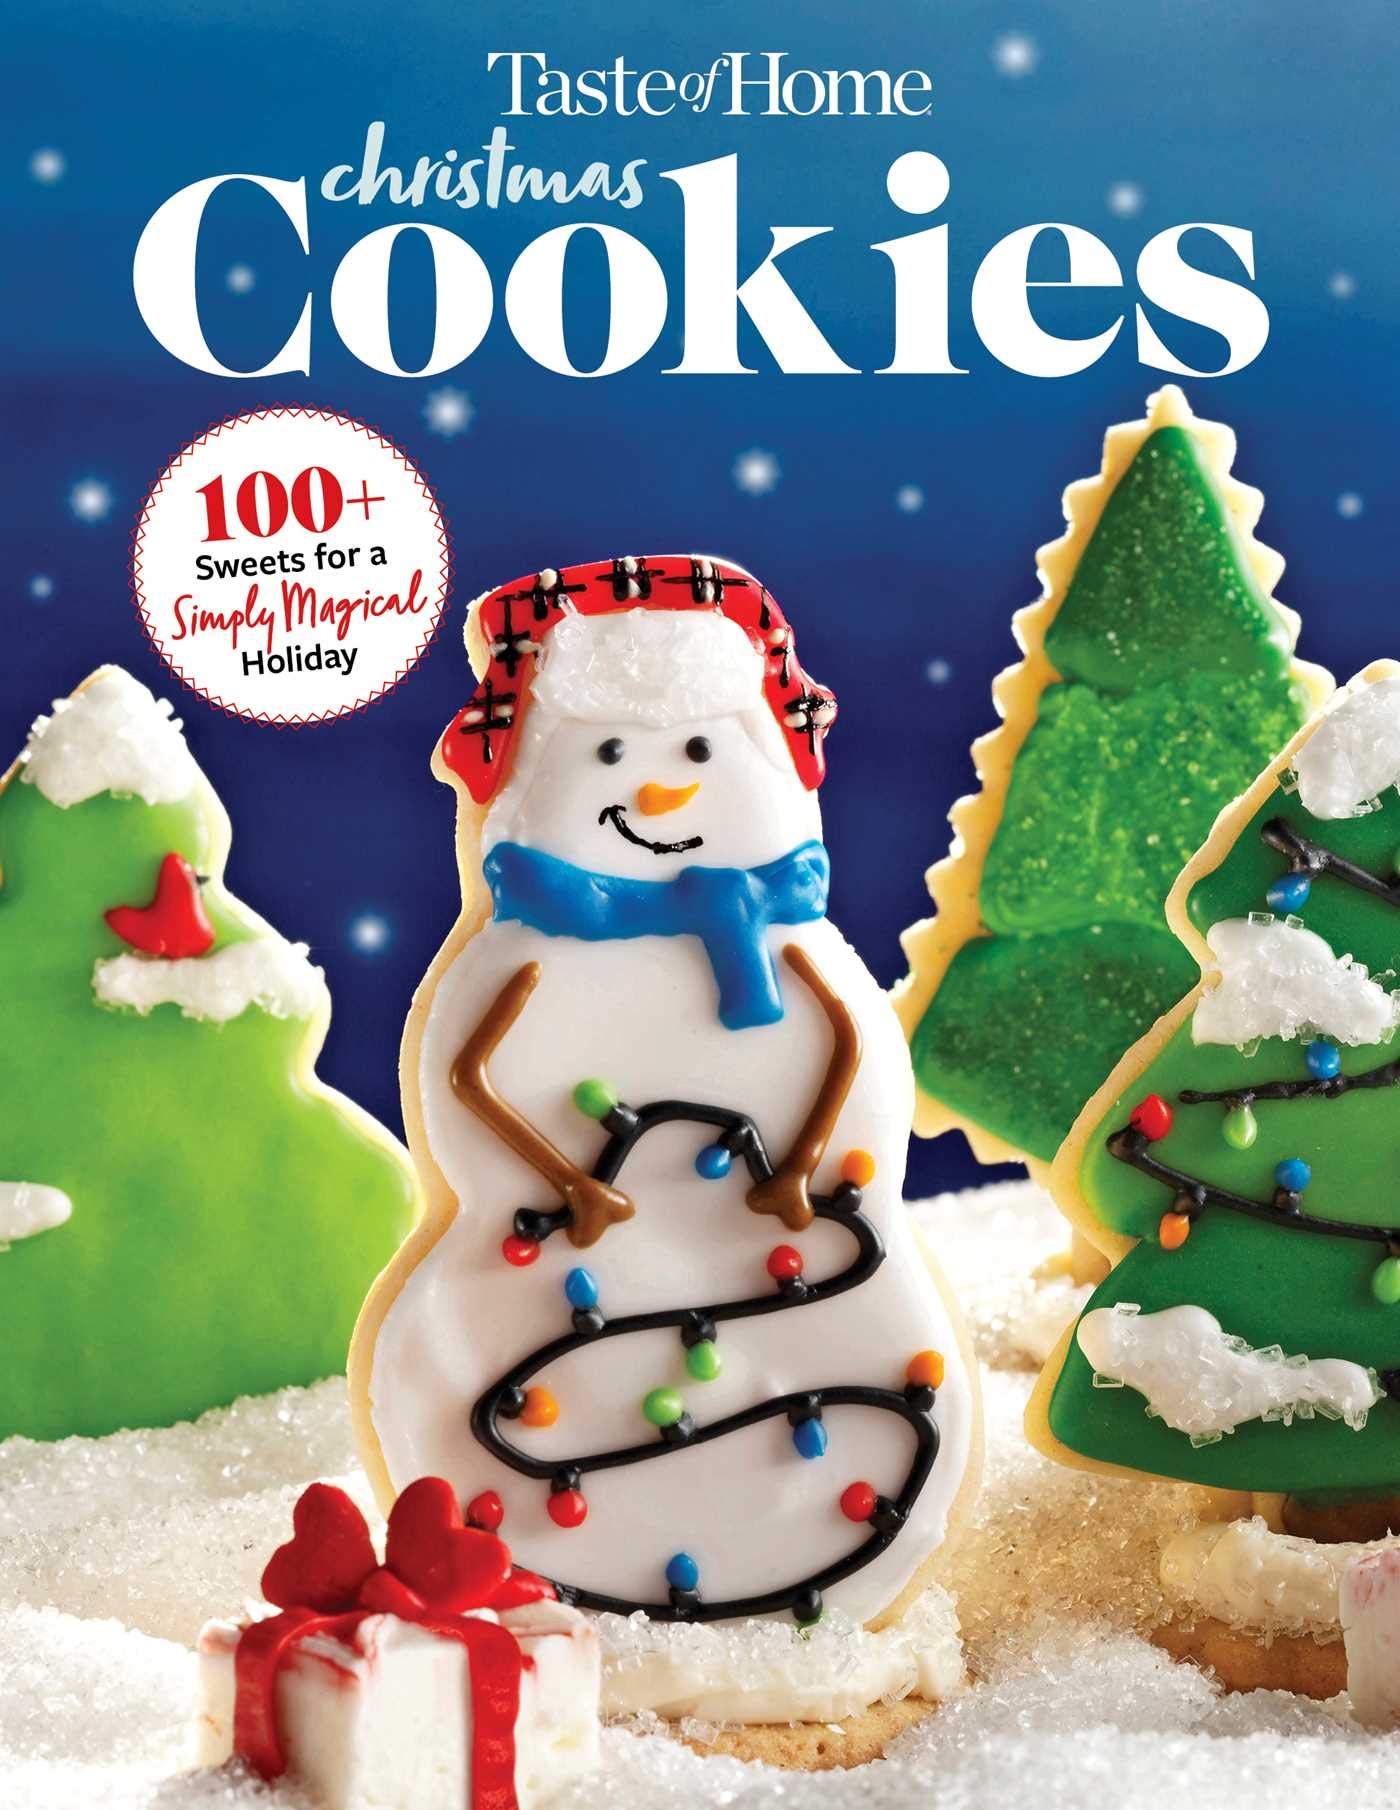 Taste of Home Christmas Cookies Mini Binder: 100+ Sweets for a simply magical holiday (TOH Mini Binder)